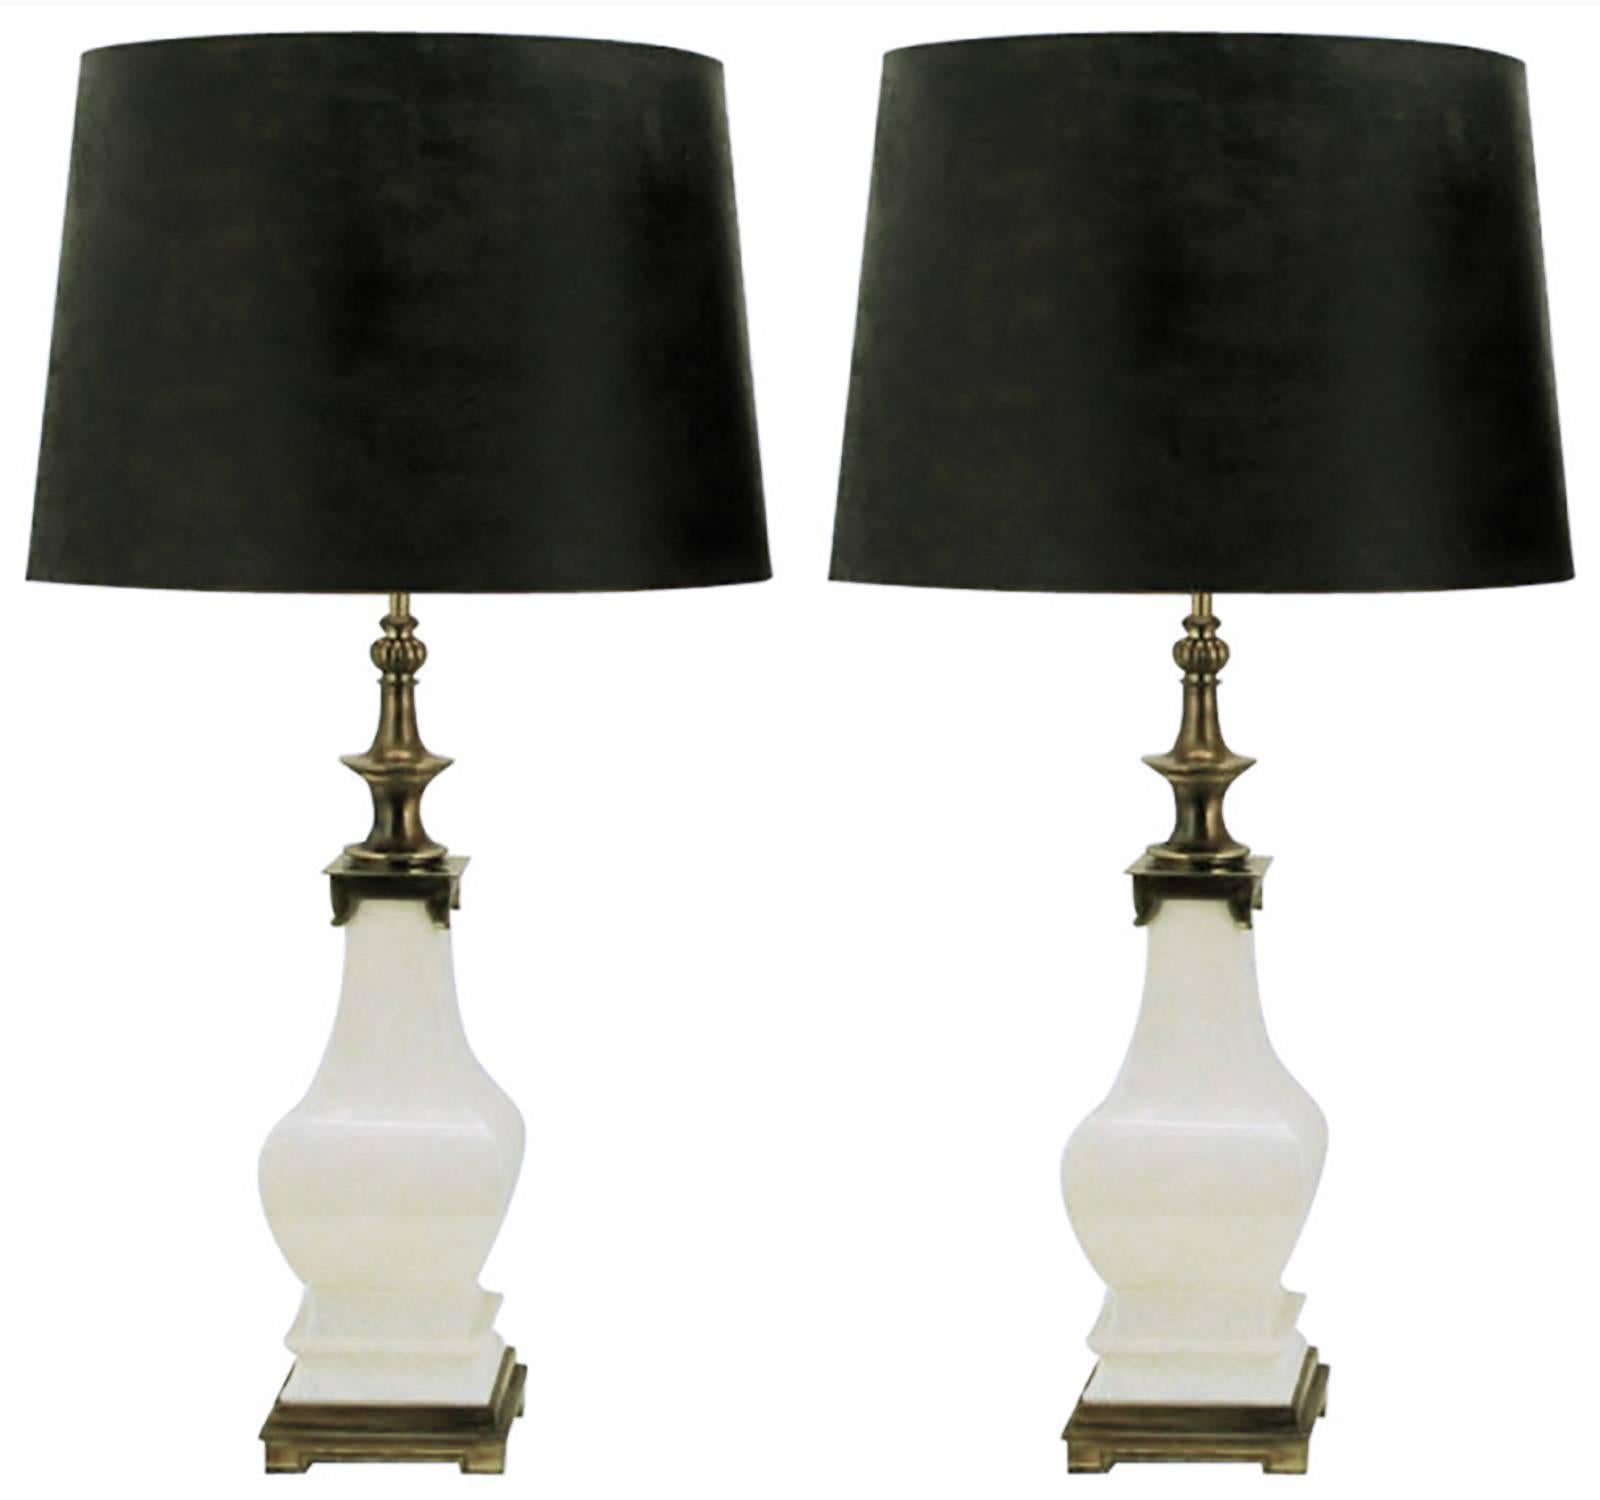 Pair of Stiffel White Crackle Glazed Ceramic and Brass Table Lamps